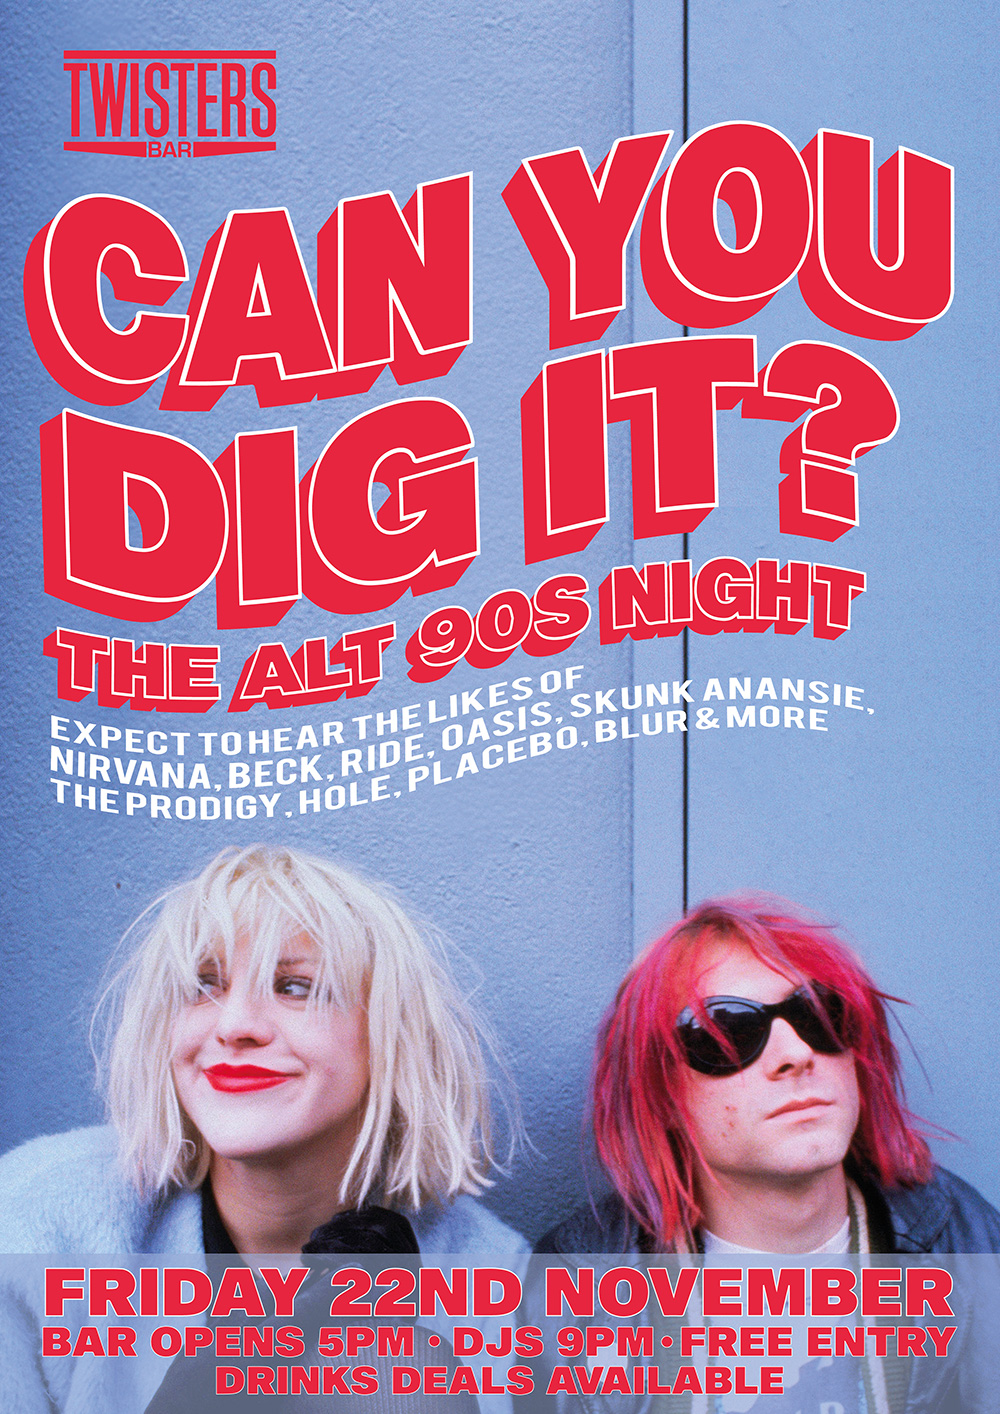 Can You Dig It? The Alternative 90s Night at Twisters Bar